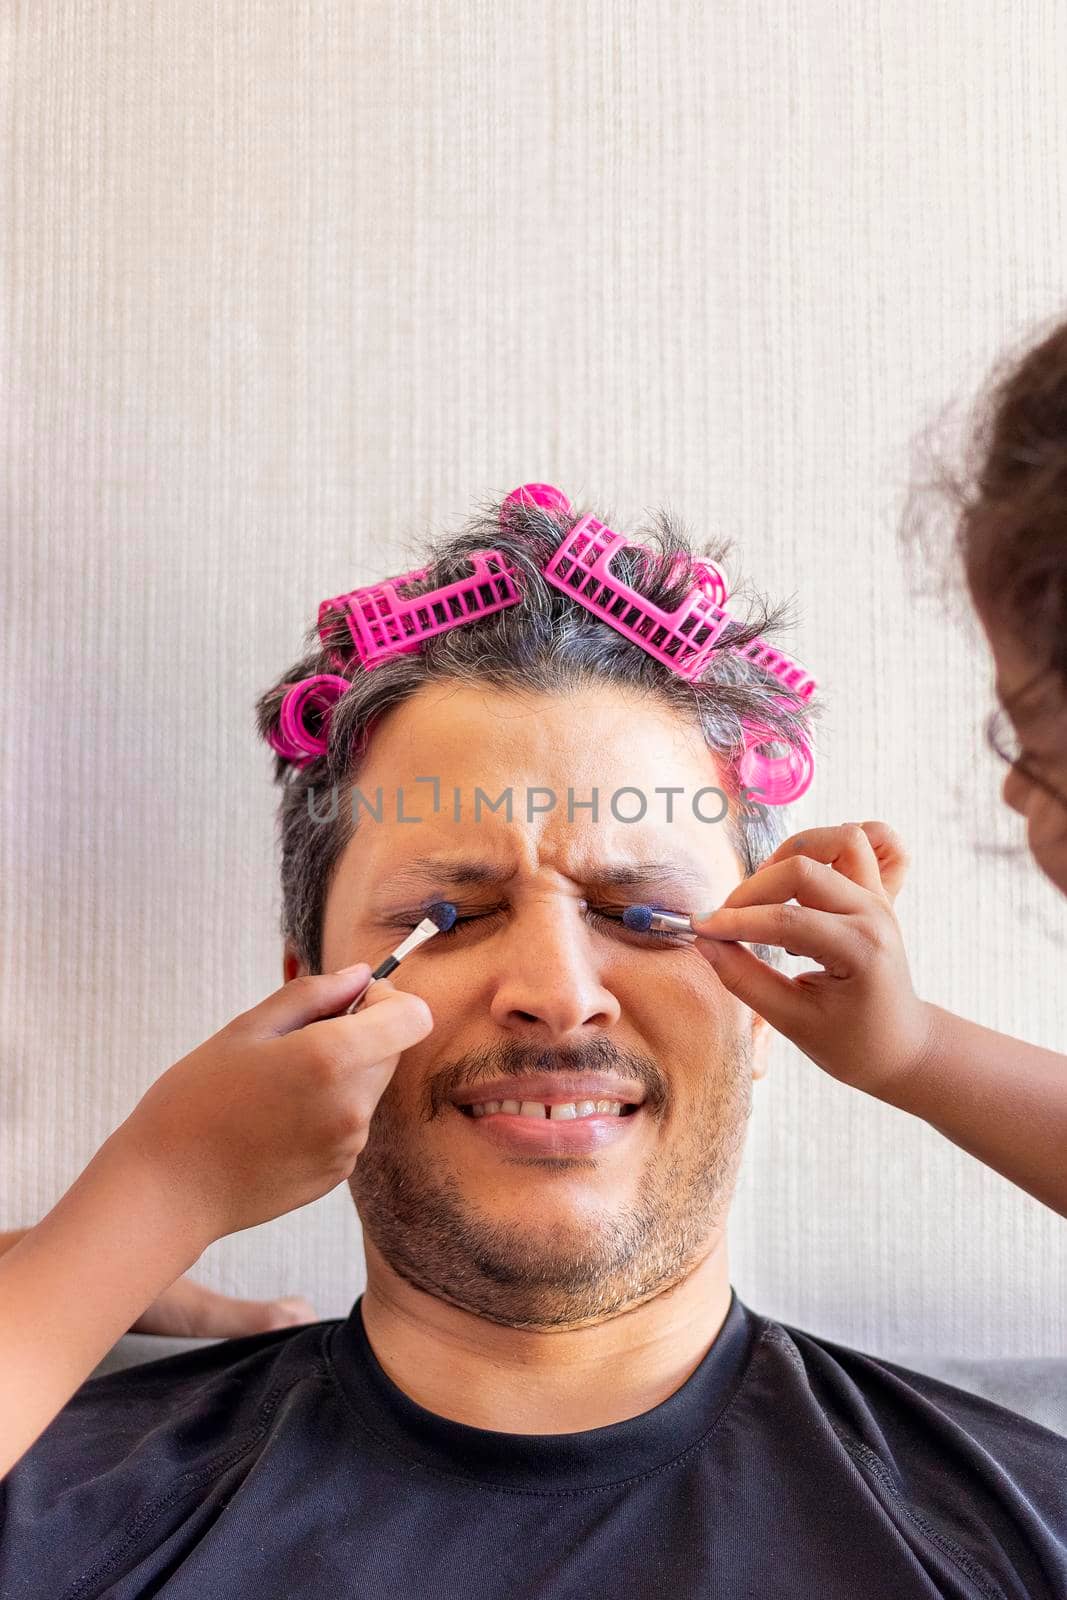 Handsome father is being makeup by the hands of his daughters by eagg13